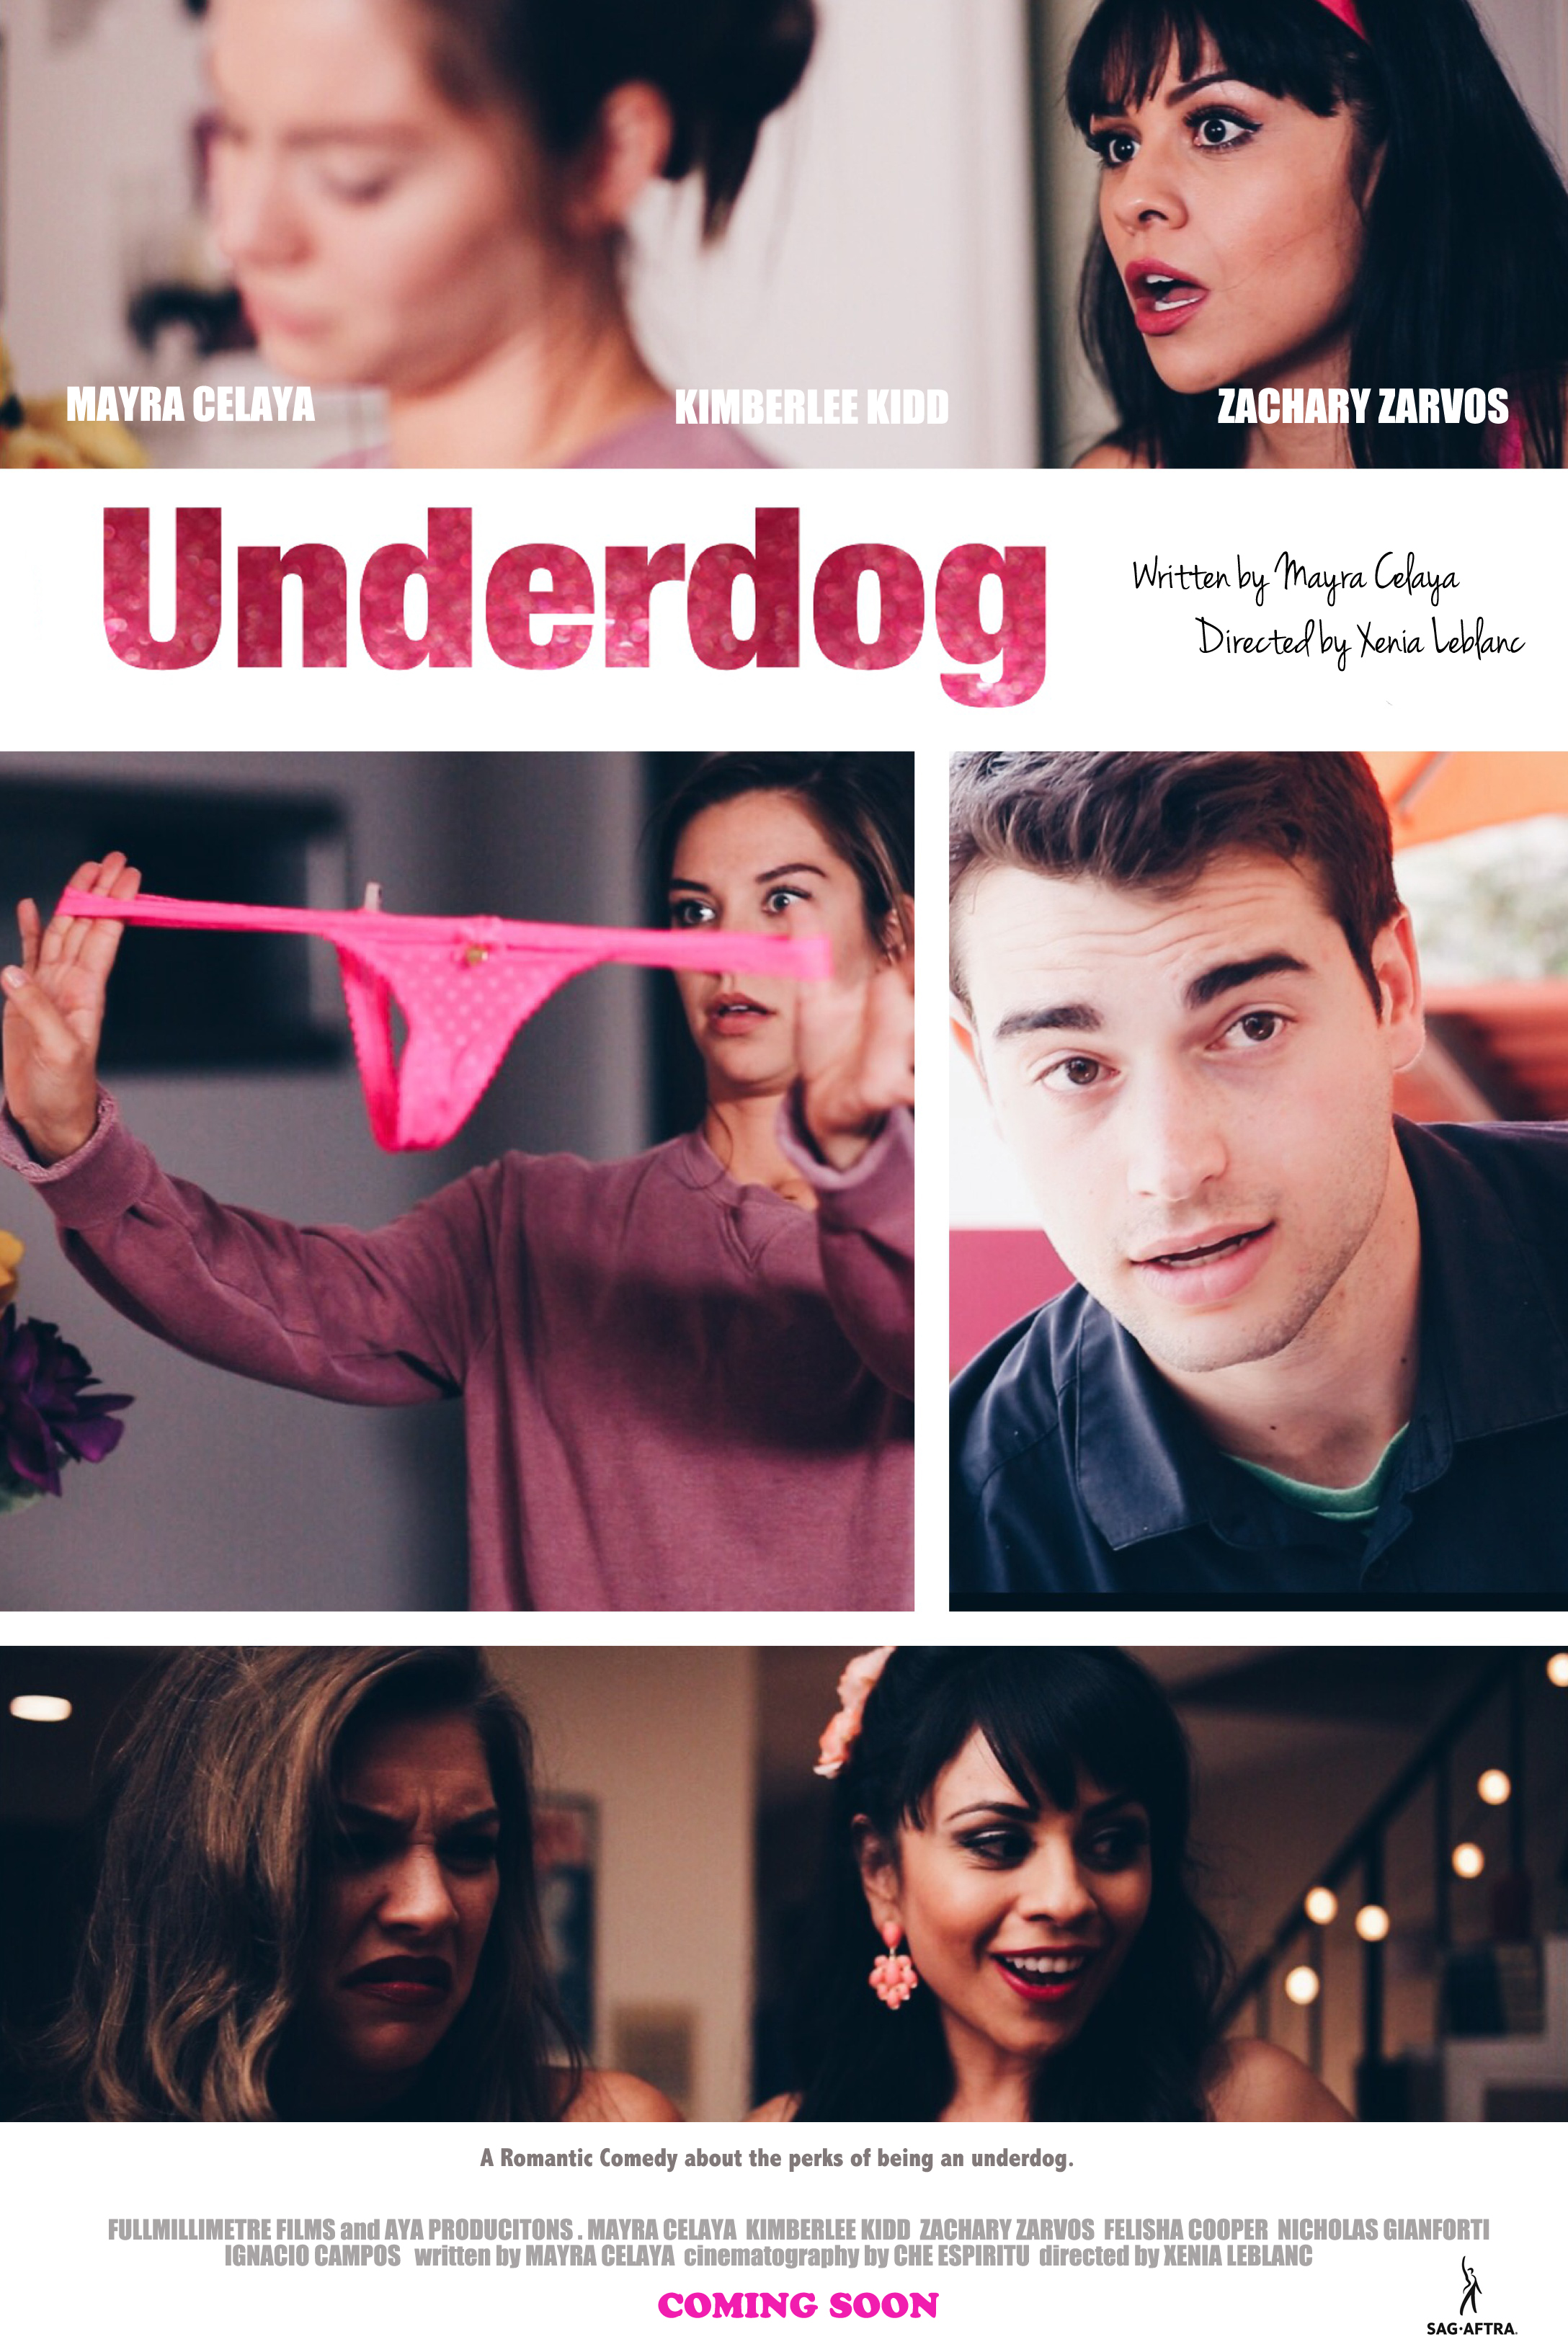 Underdog, a short film written and produced by Mayra Celaya. Also starring Mayra Celaya with Kimberly Kidd.